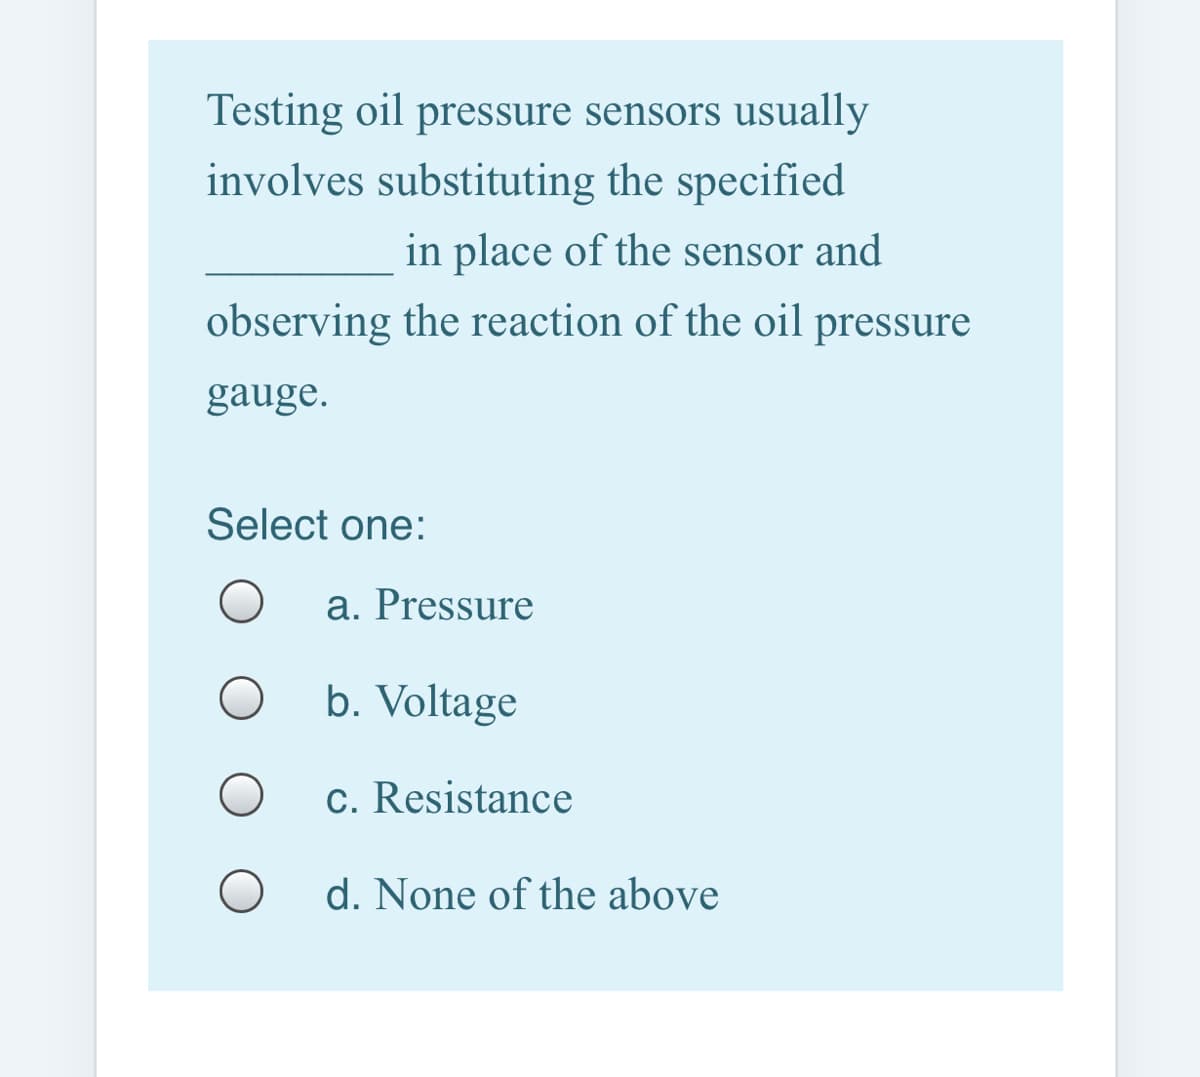 Testing oil pressure sensors usually
involves substituting the specified
in place of the sensor and
observing the reaction of the oil pressure
gauge.
Select one:
a. Pressure
b. Voltage
c. Resistance
d. None of the above
